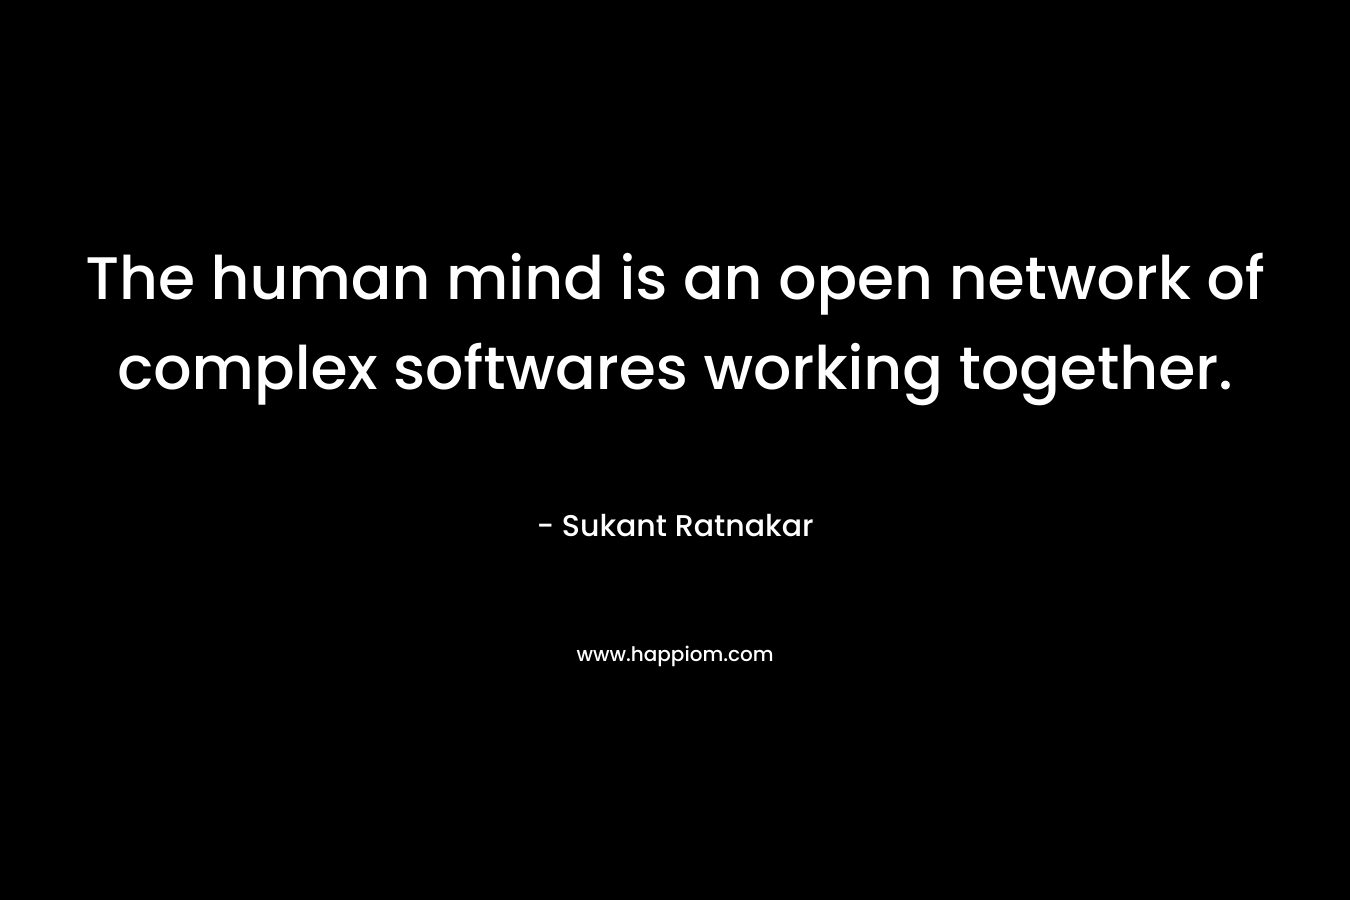 The human mind is an open network of complex softwares working together.